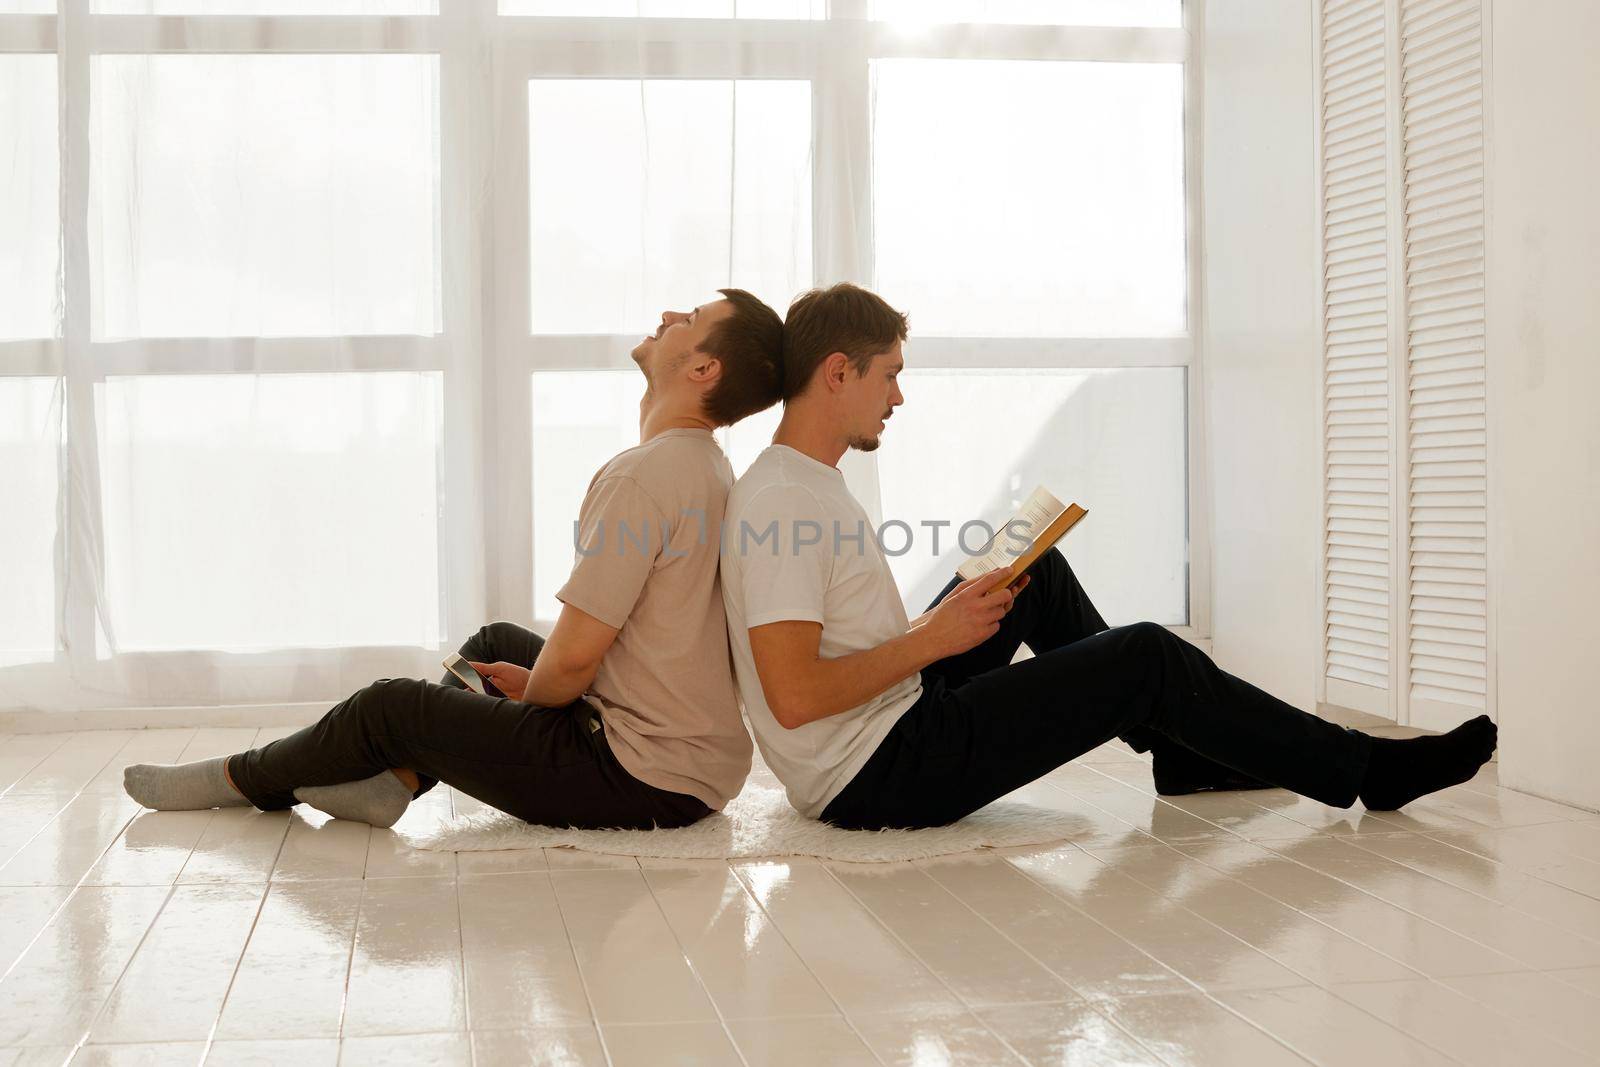 A nice guy reads a book and his friend listens to him and looks into a smartphone. Gay couple of men spend time at home sitting on the floor of the house in a light interior